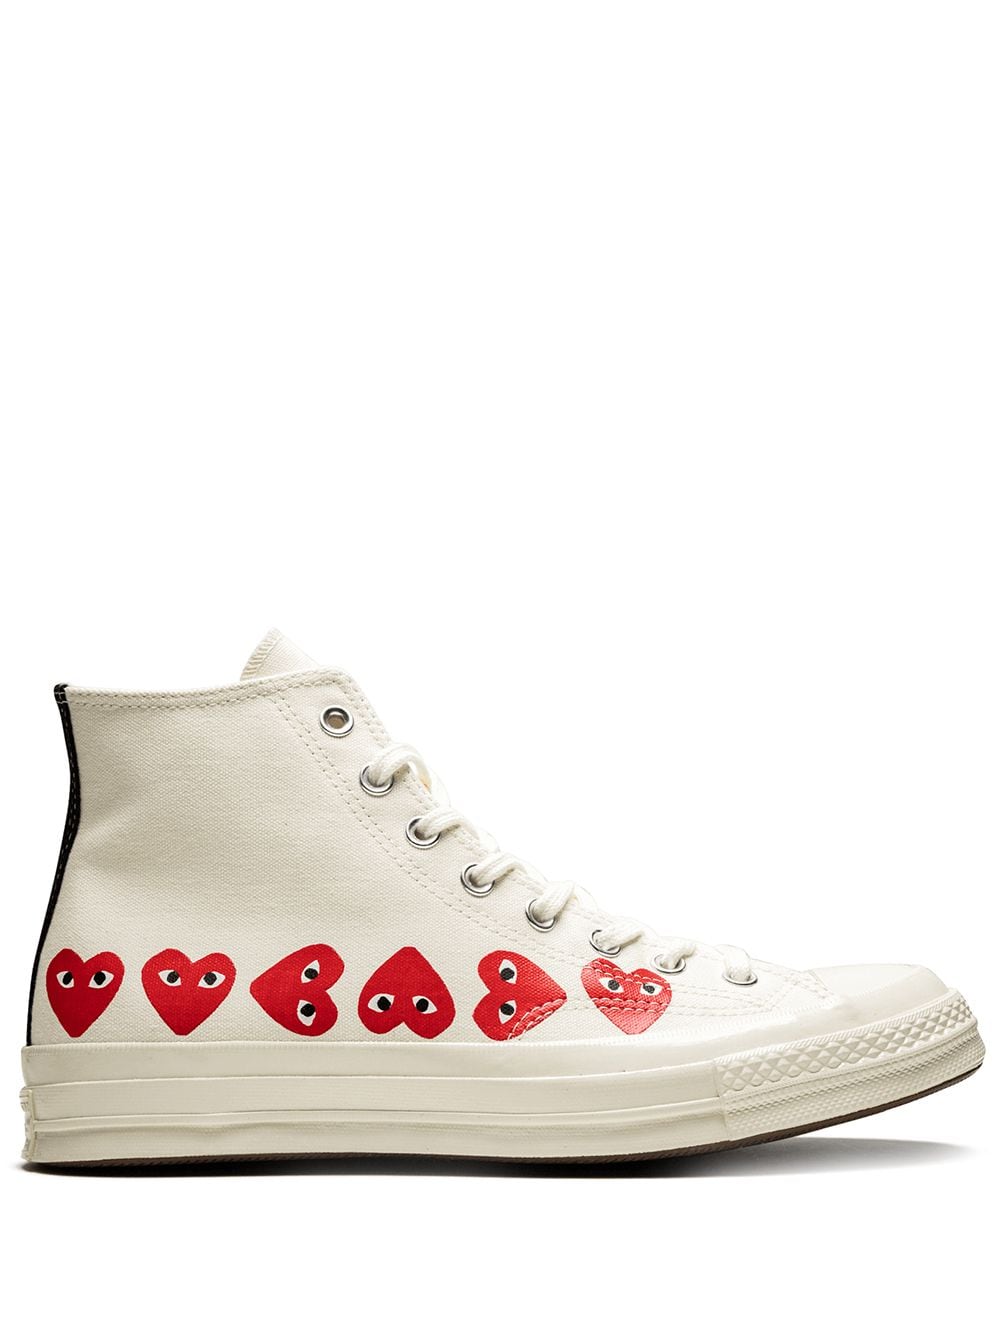 COMME DES GARCONS PLAY X CONVERSE CHUCK TAYLOR MULTI HEART HIGH TOP SNEAKERS